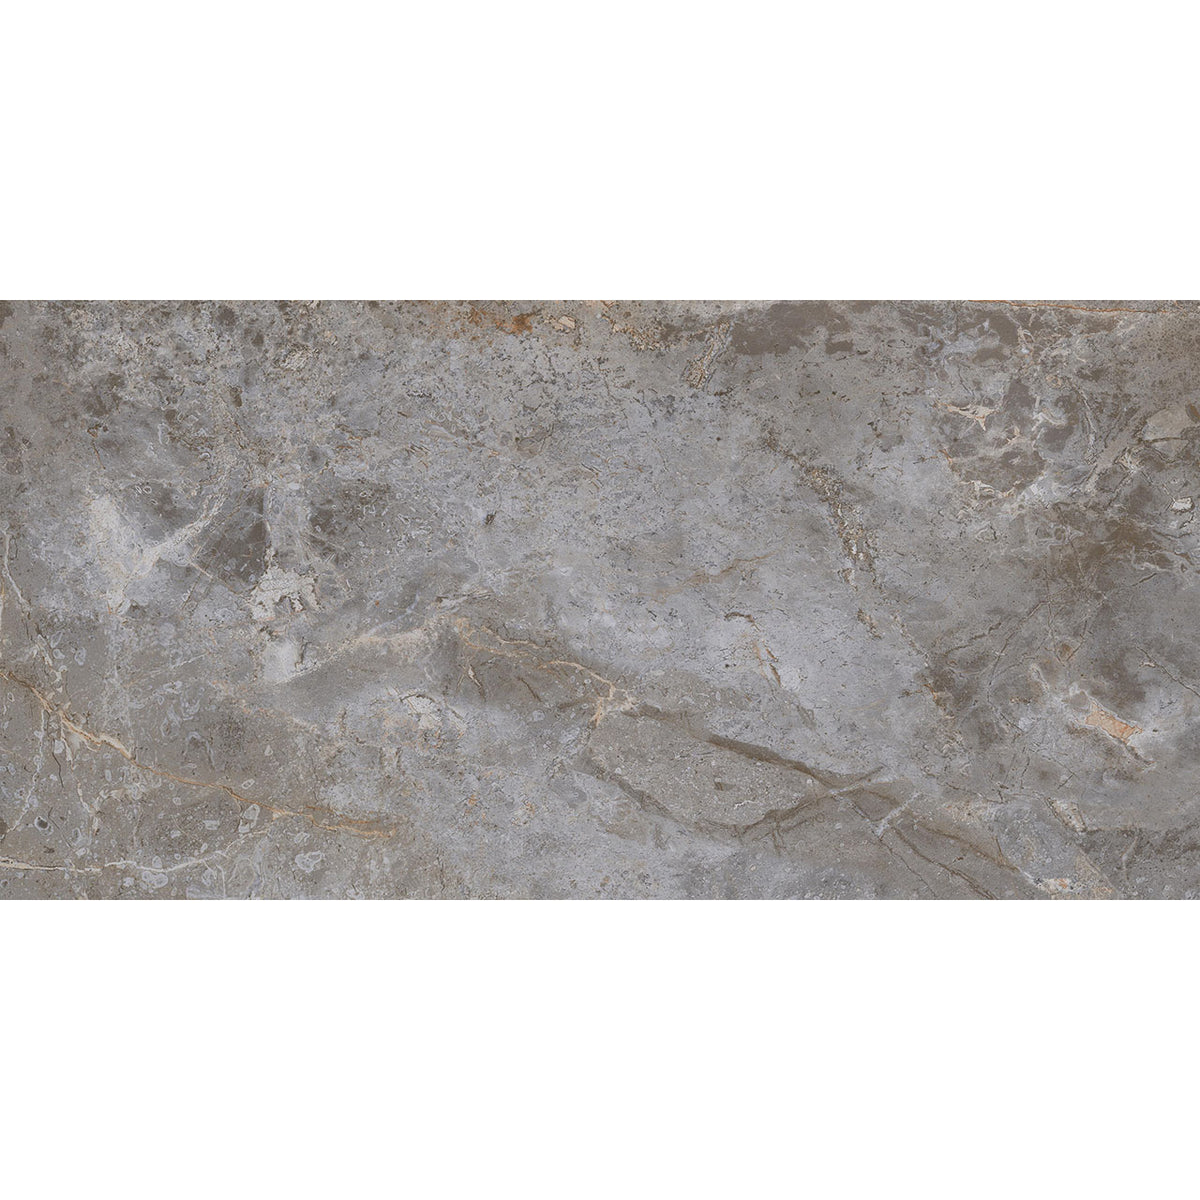 Floors 2000 - Amazon 12 in. x 24 in. Porcelain Tile - Grey Polished